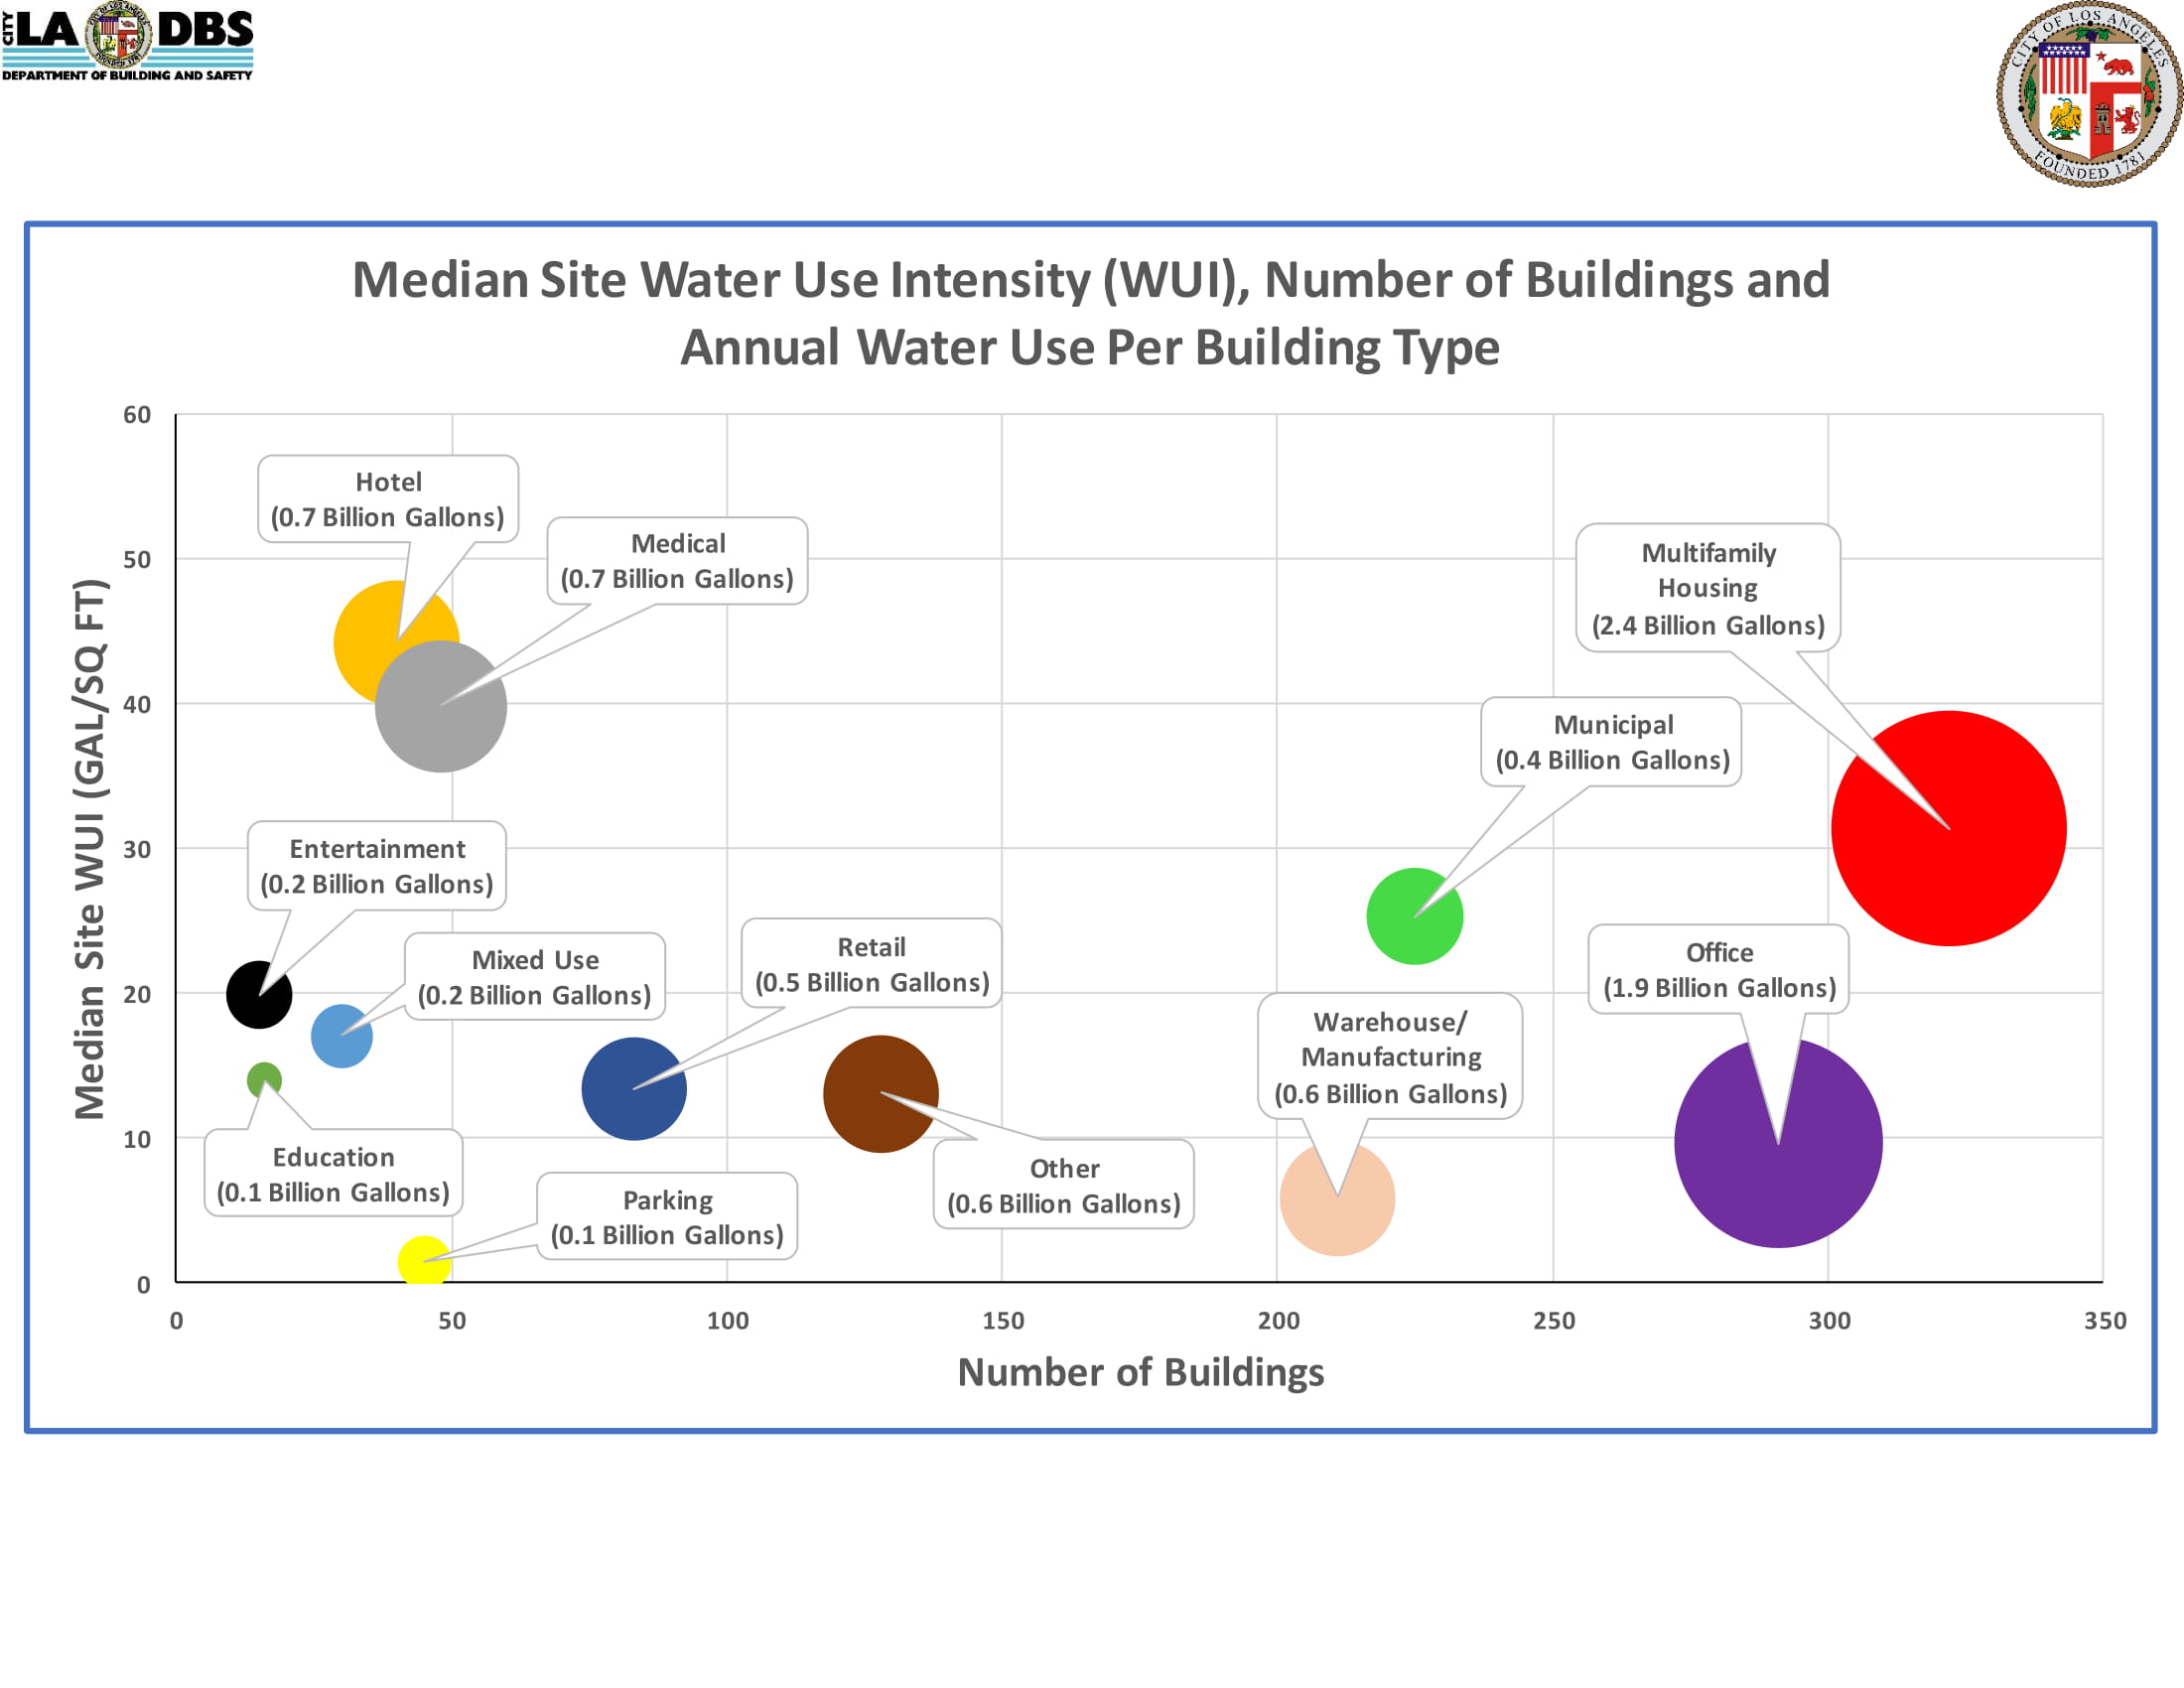 Median Site Water Use Intensity (WUI) Number of Buildings and Annual Water Use Per Building Type